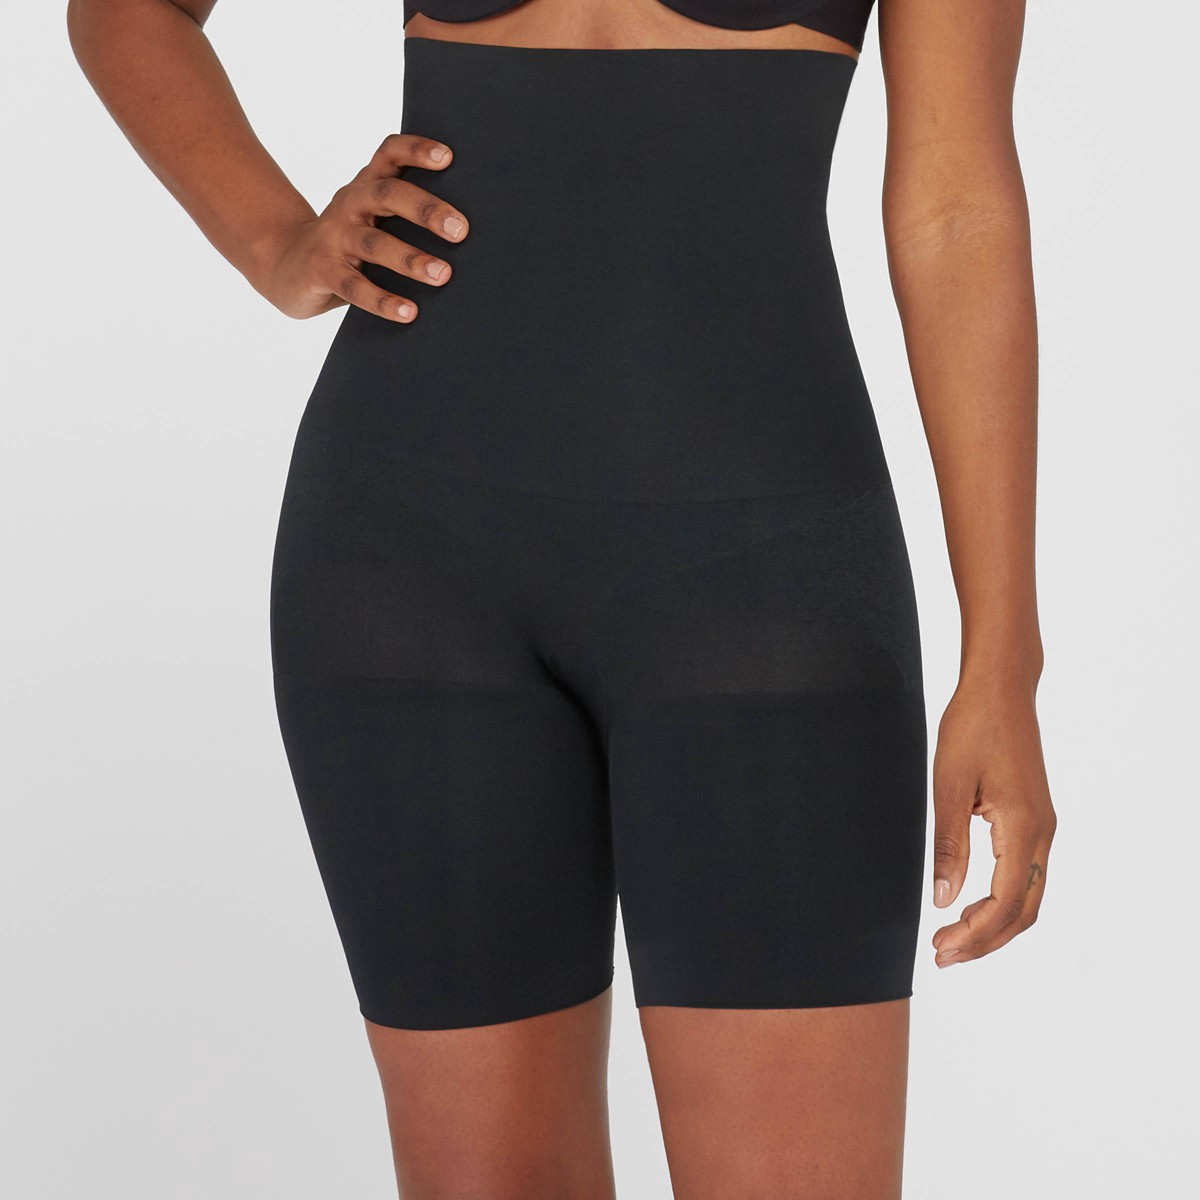 slide 1 of 5, ASSETS by SPANX Women's Remarkable Results High-Waist Mid-thigh Shaper - Black S, 1 ct